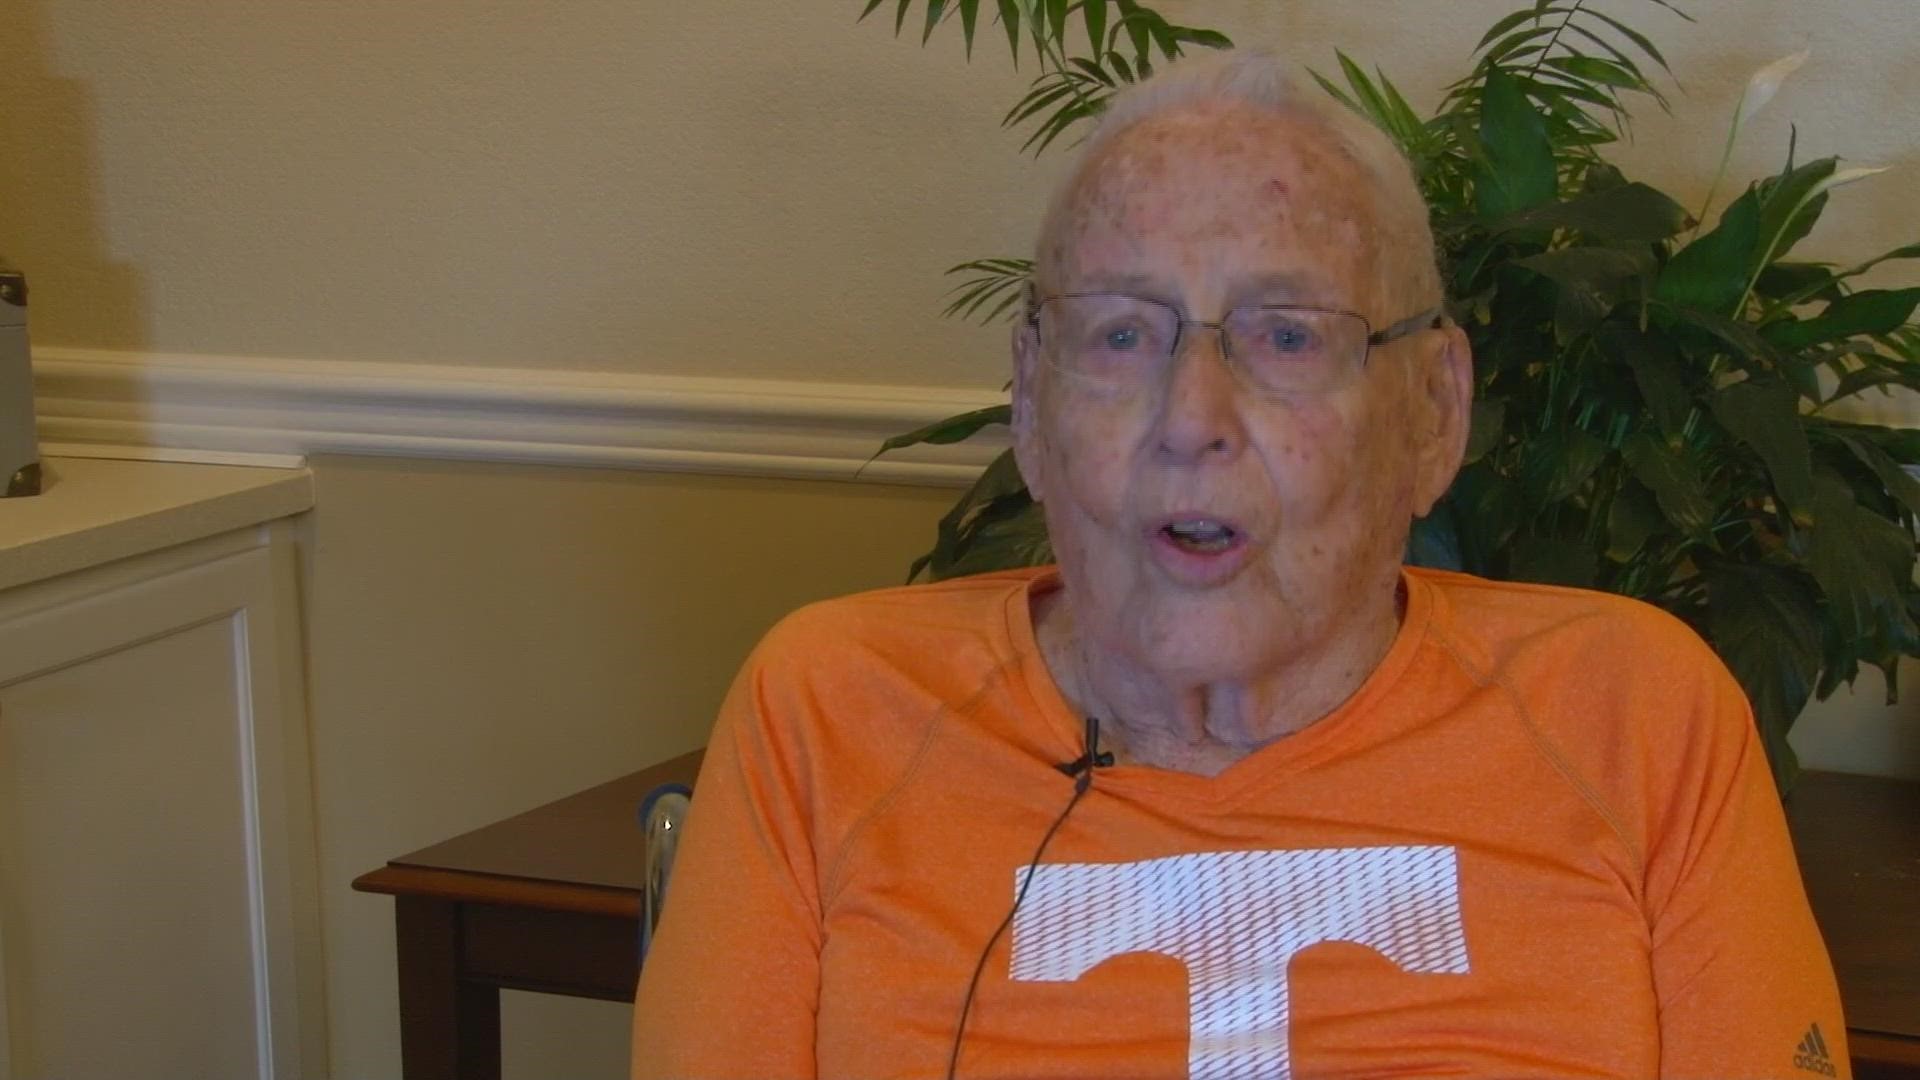 David Barber, 100 years old, was recognized in the UT vs. Ole Miss football game Saturday night.